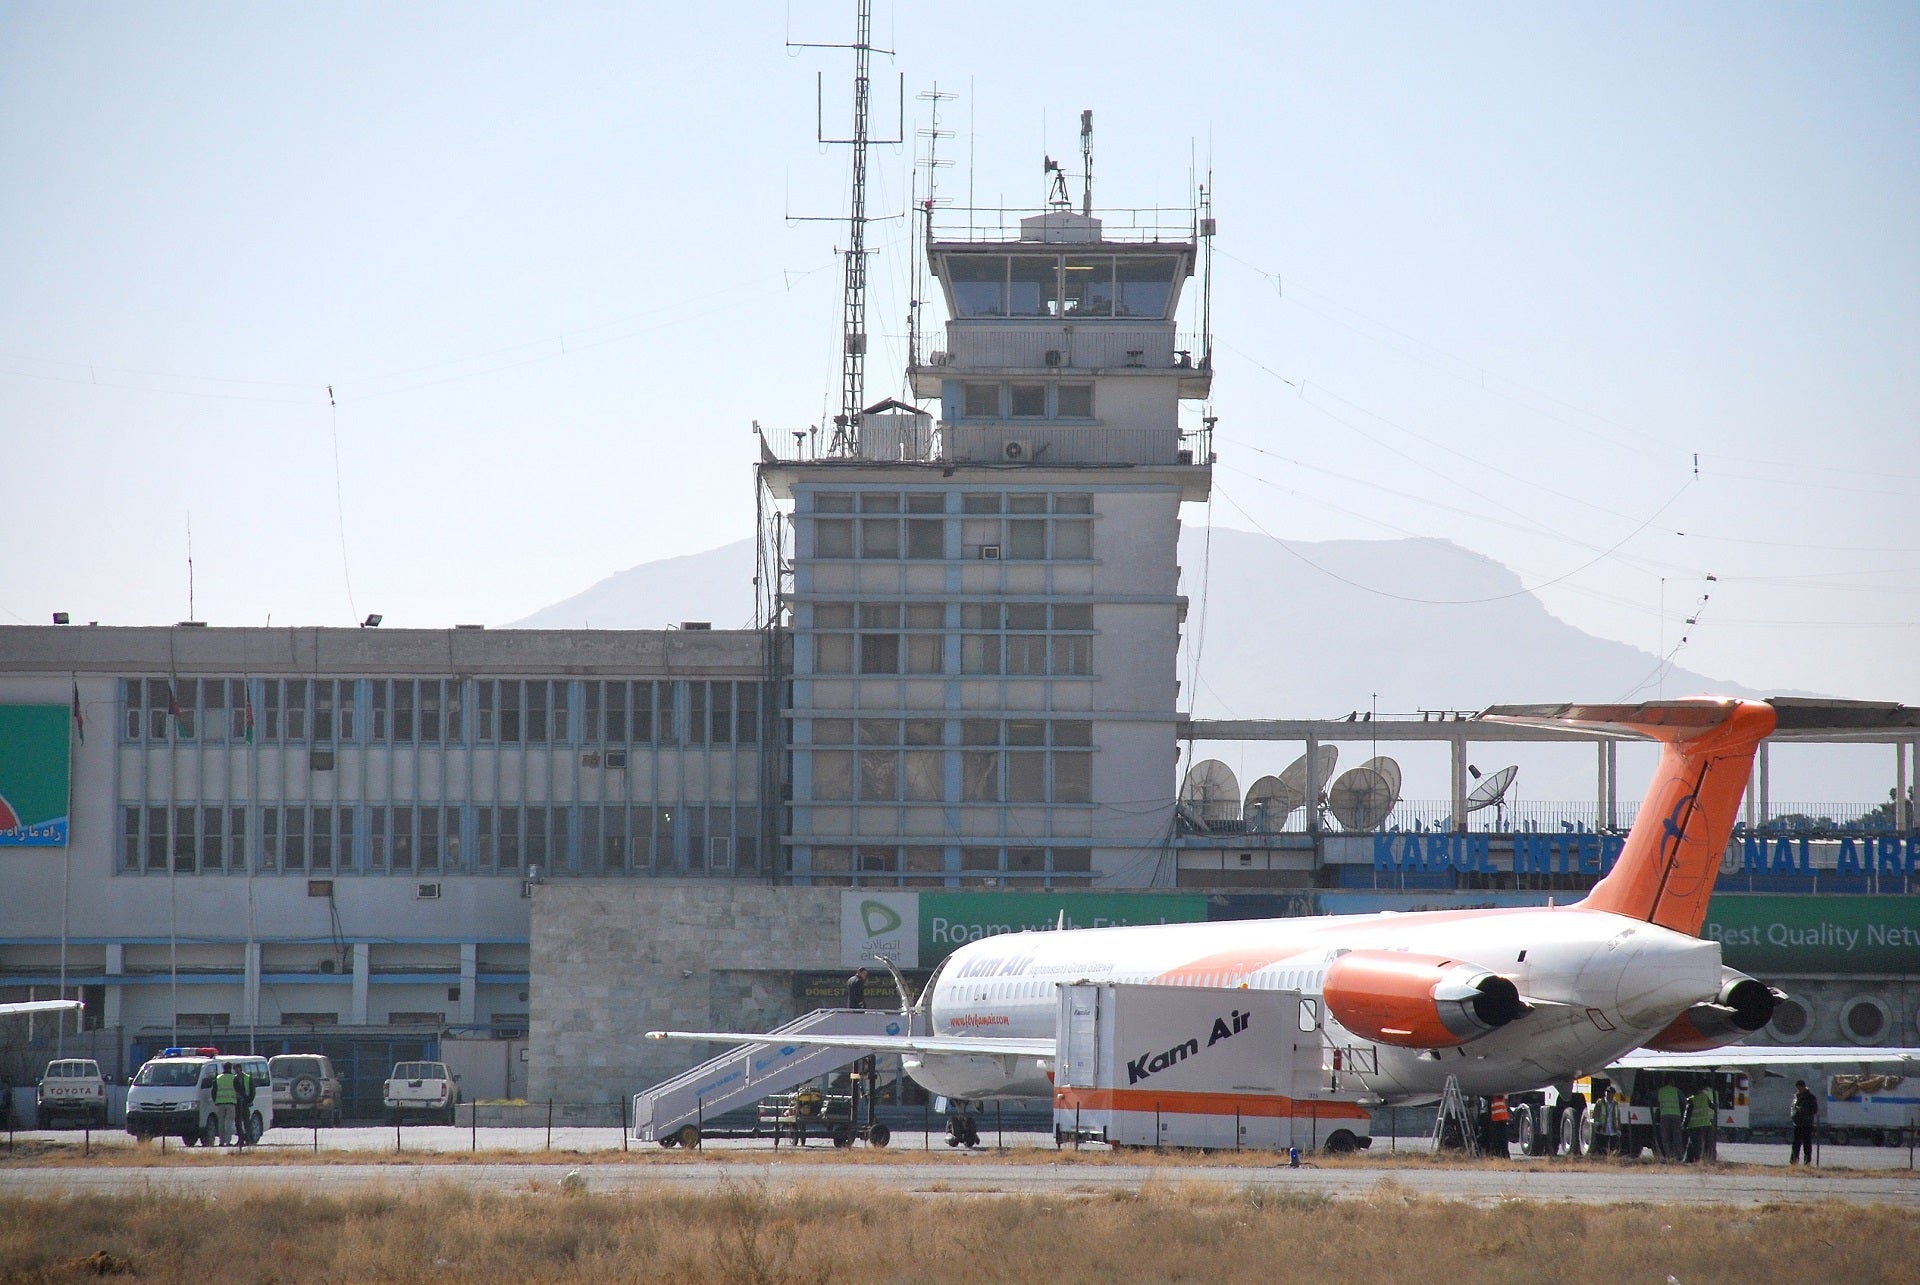 Https Www Airport Technology Com Wp Content Uploads Sites 14 2021 06 3227px Kam Air At Kabul Airport In 2010 Jpg [ 1285 x 1920 Pixel ]